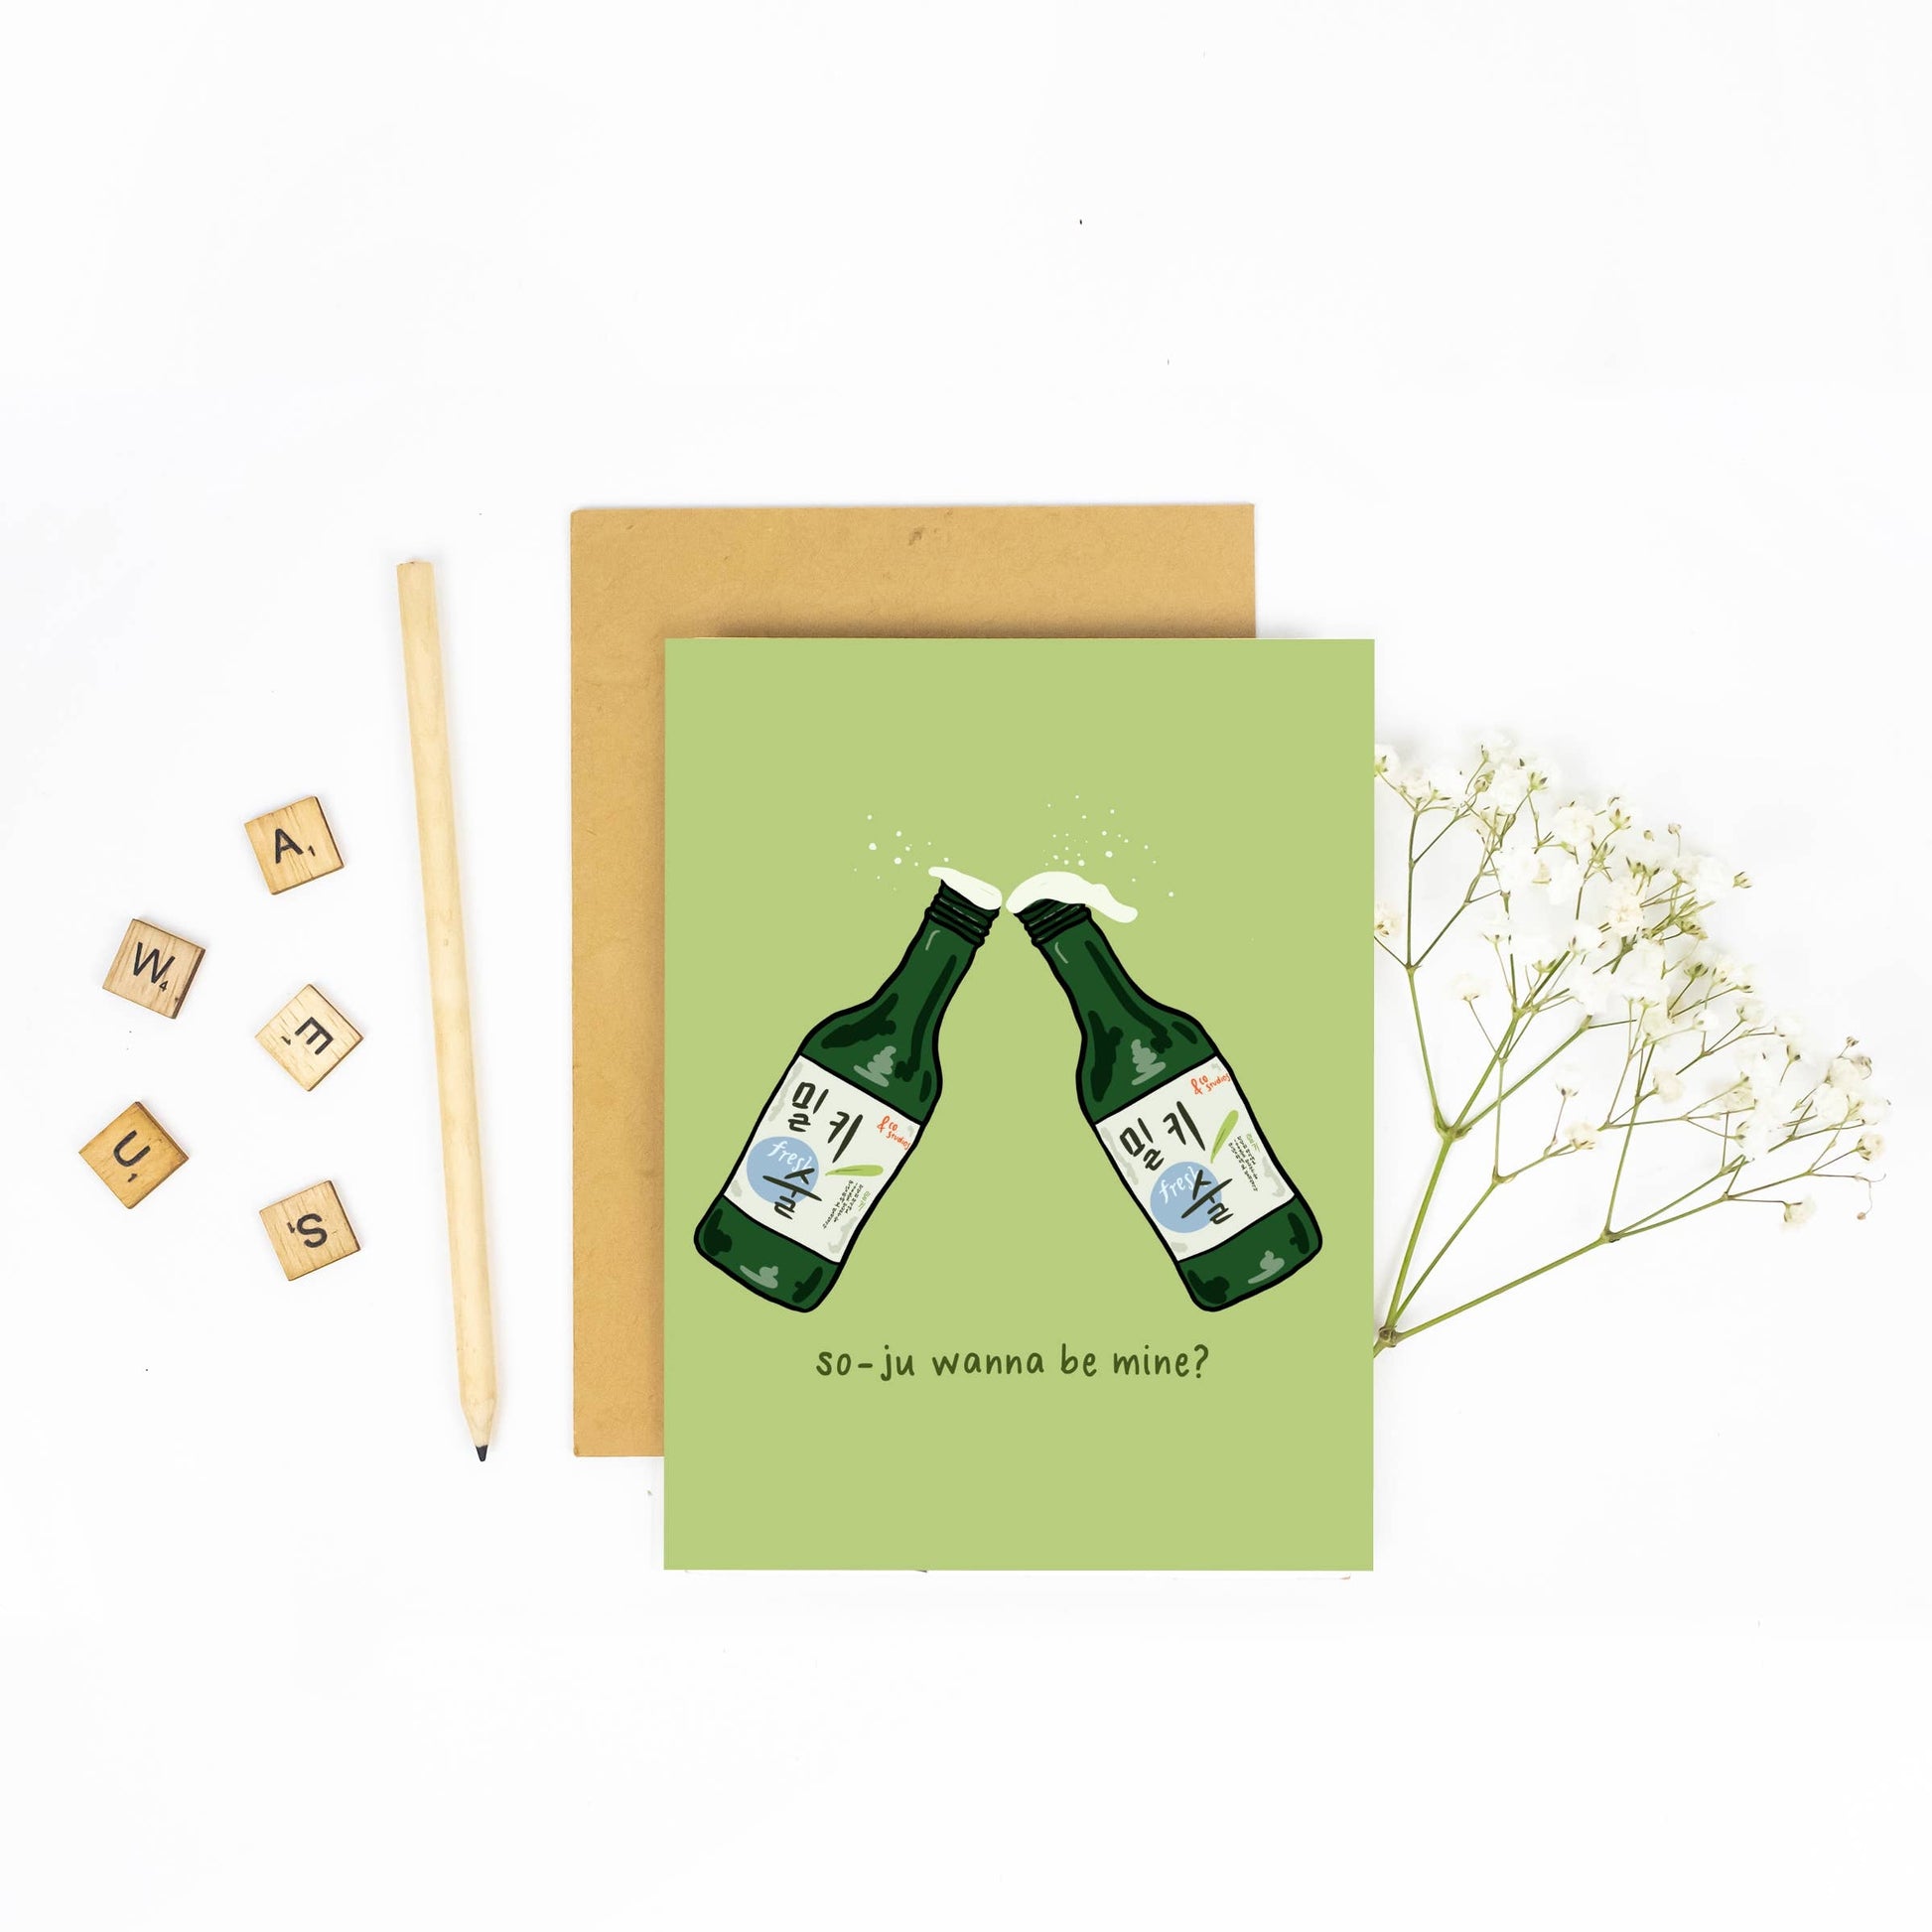 Light green greeting card with two soju fresh bottles clinking and text at the bottom that reads "so-ju wanna be mine?"